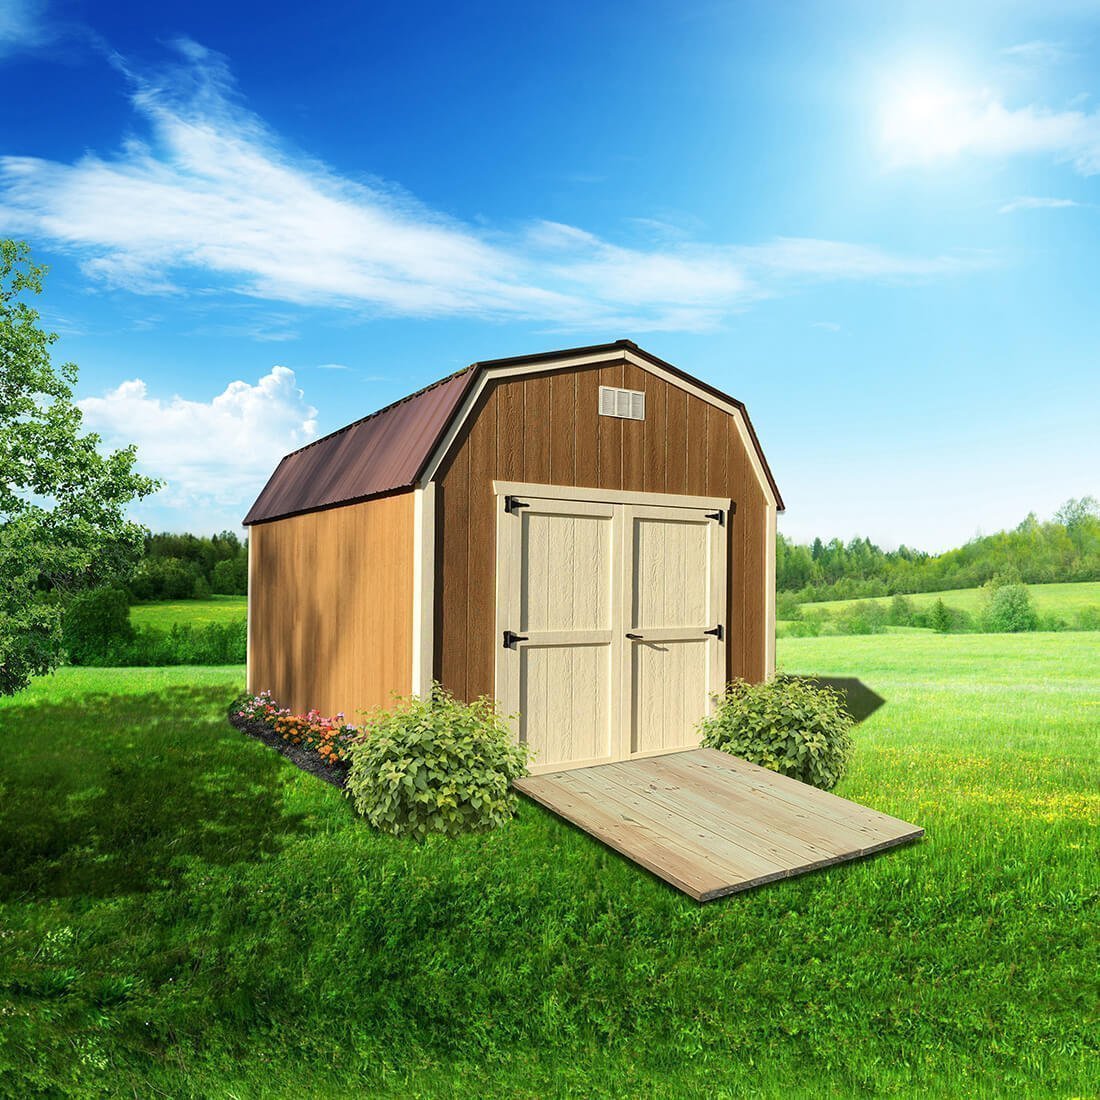 Wooden new England dutch barn shed